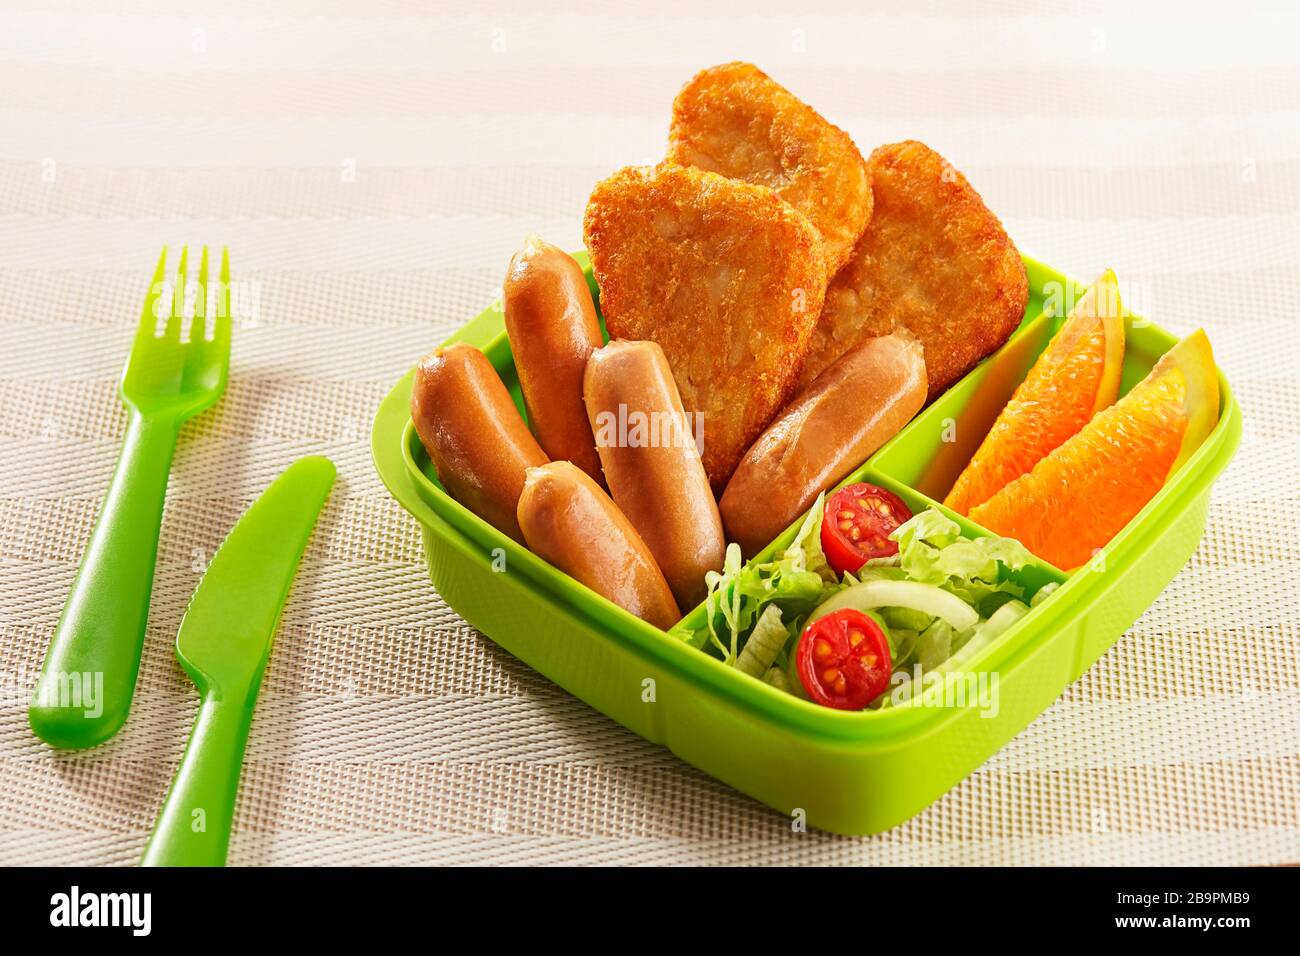 Packed lunch boxes filled with hash brown, cocktail sausages, orange fruits and salads, ready to be taken for activities Stock Photo